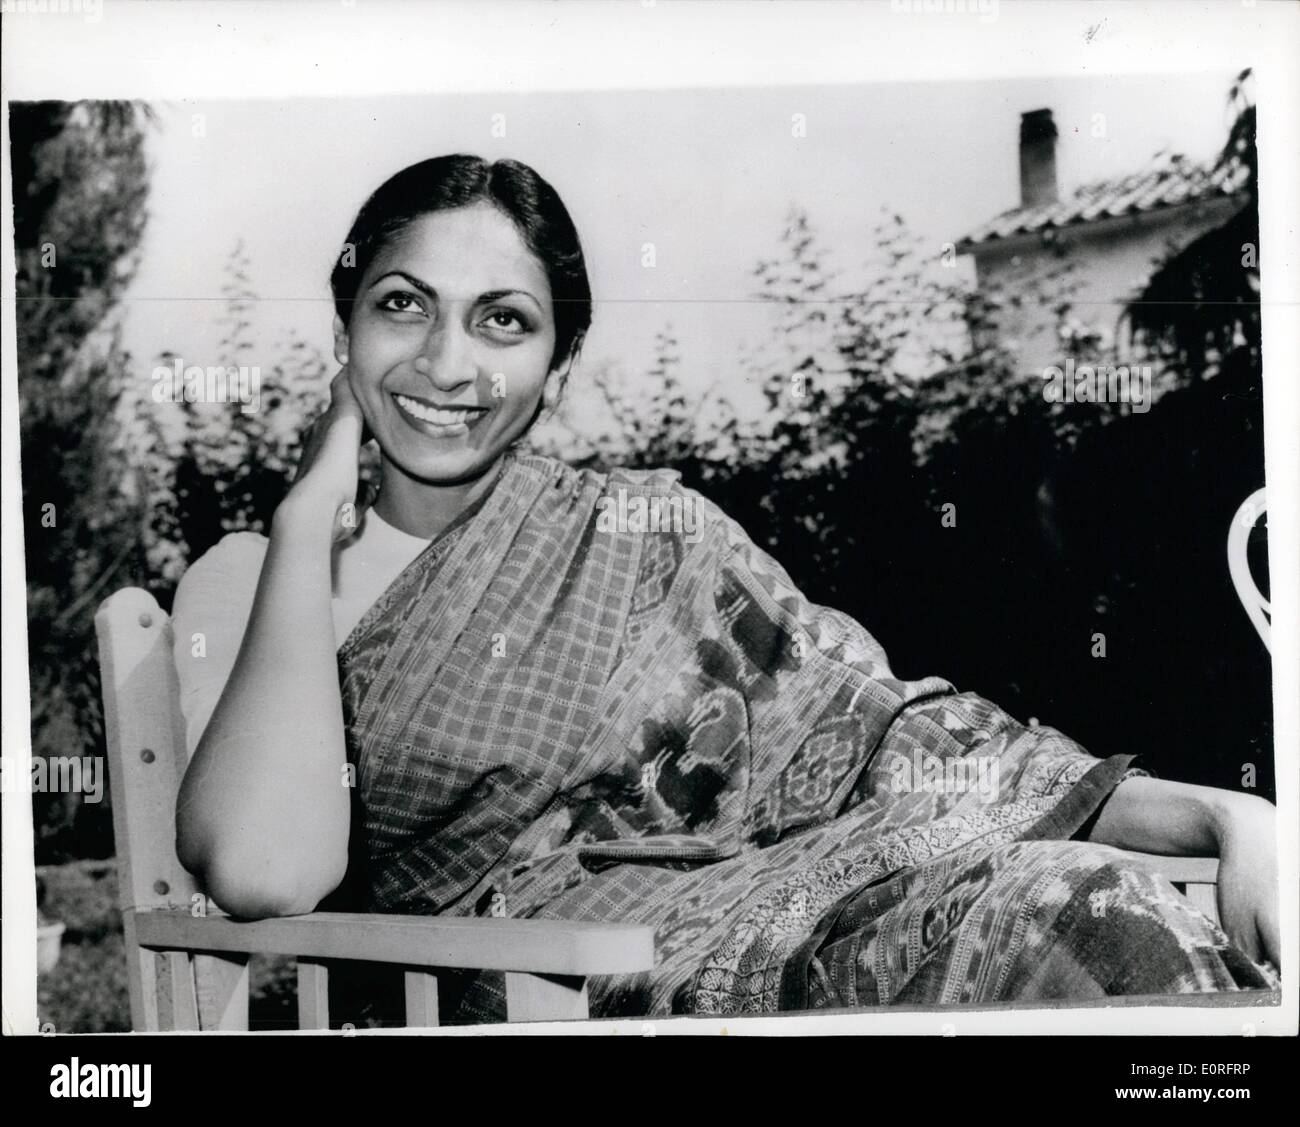 May 05, 1959 - Sonali Das Gupta in Rome.: Photo shows charming study of Sonali Das Gupta, friend of Italian producer Roberto Rossellini, pictured at a villa near Rome after arriving from Paris, where she went following the Cannes Film Festival which she attended with Rossellini to see his latest film ''India' Stock Photo